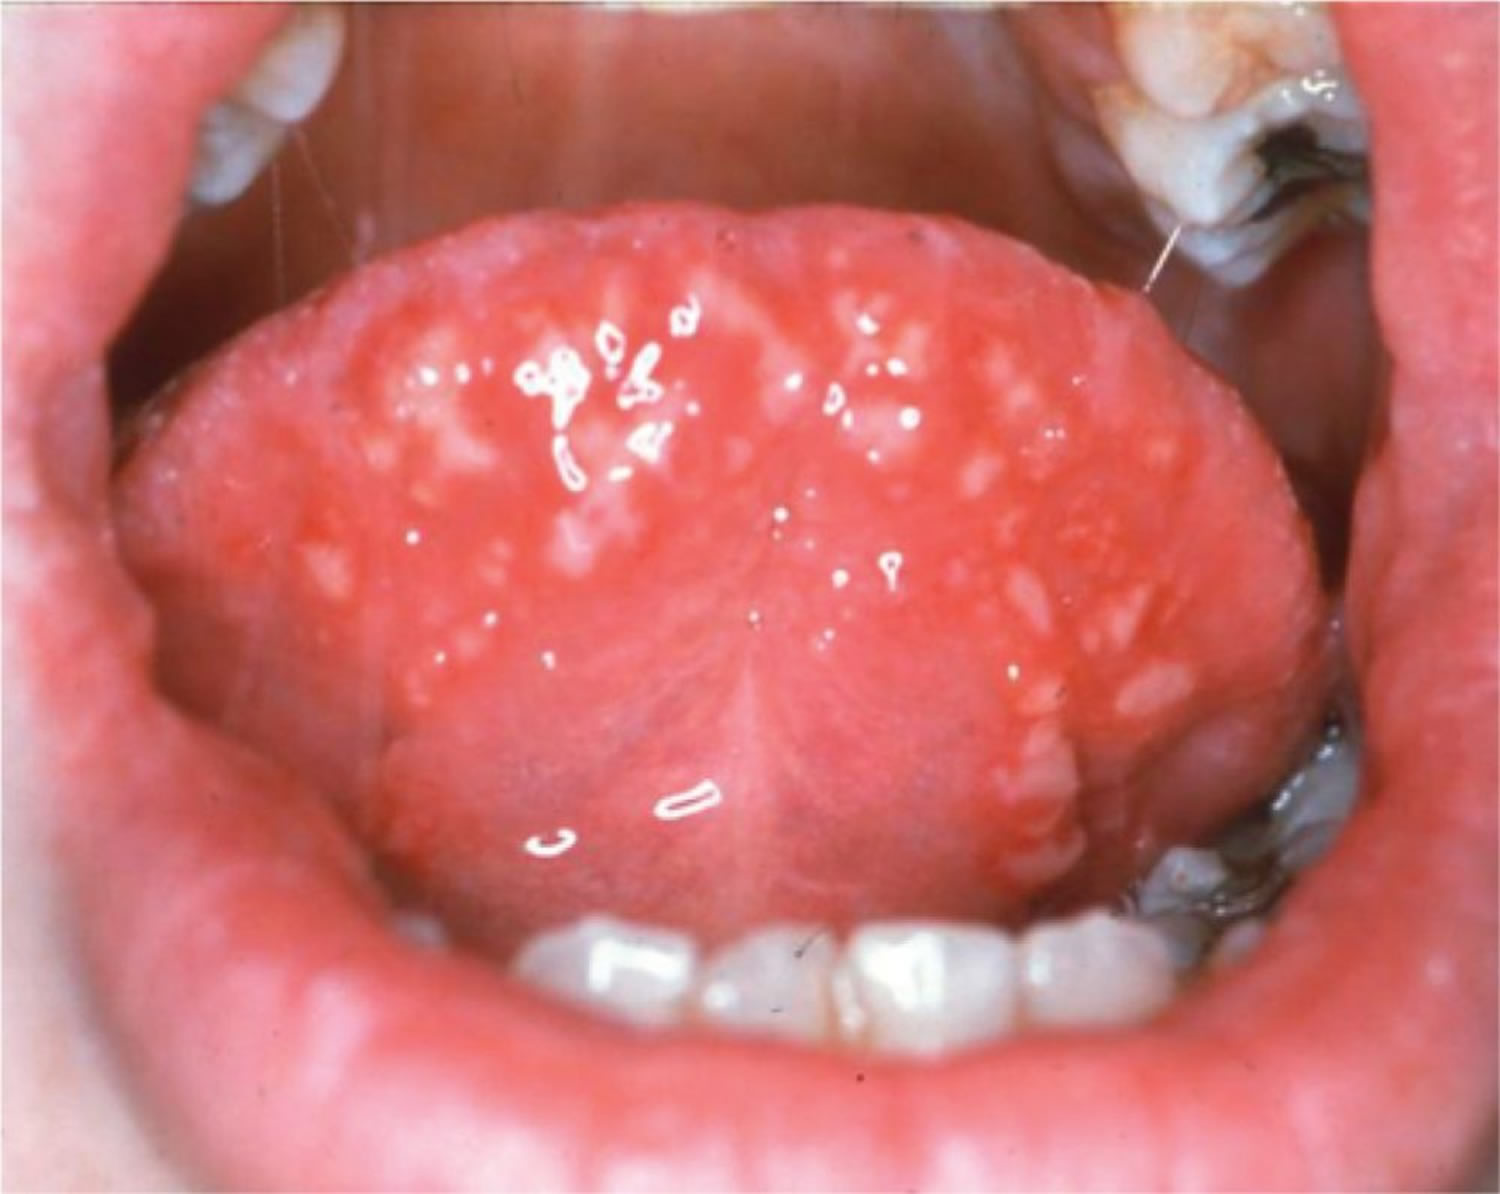 Tongue blister under small clear Causes of